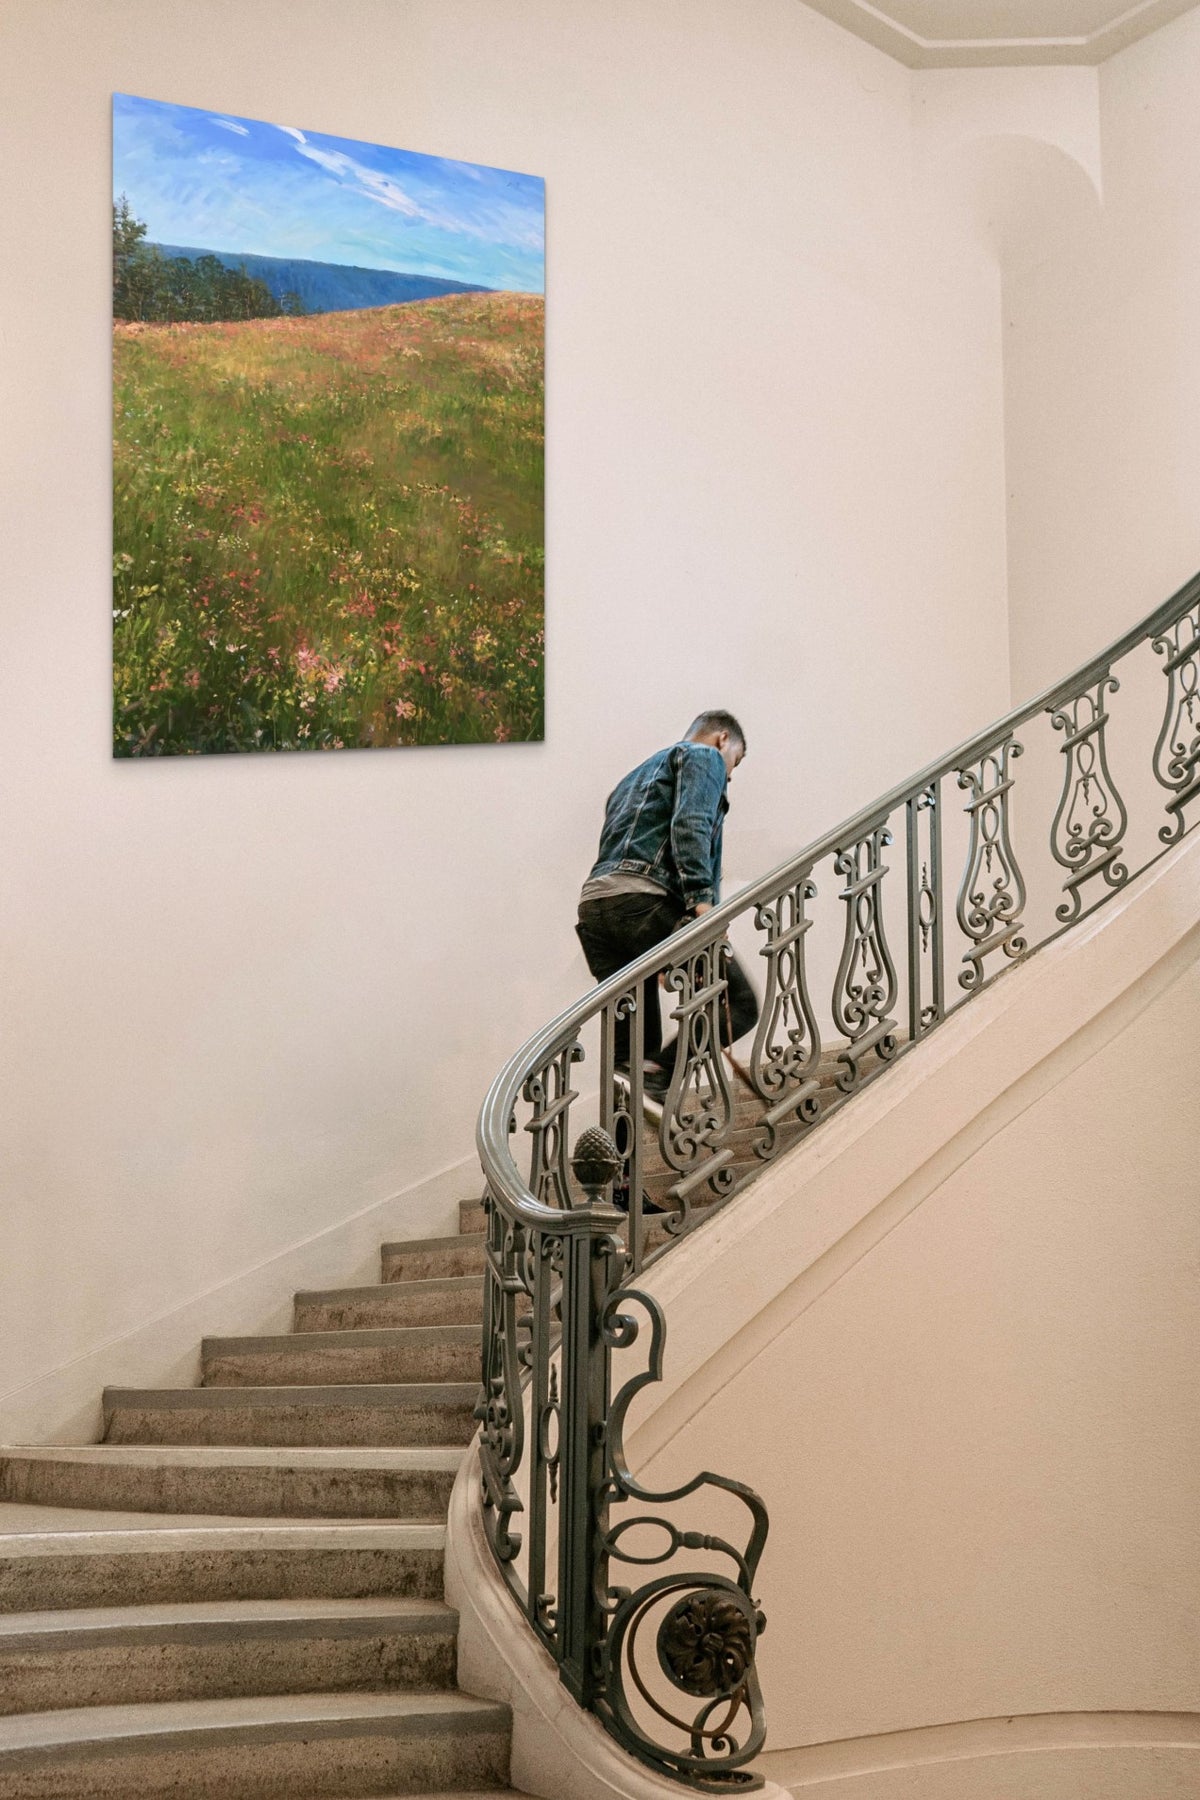 Landscape Artwork adds nature, blue & green to this classic staircase